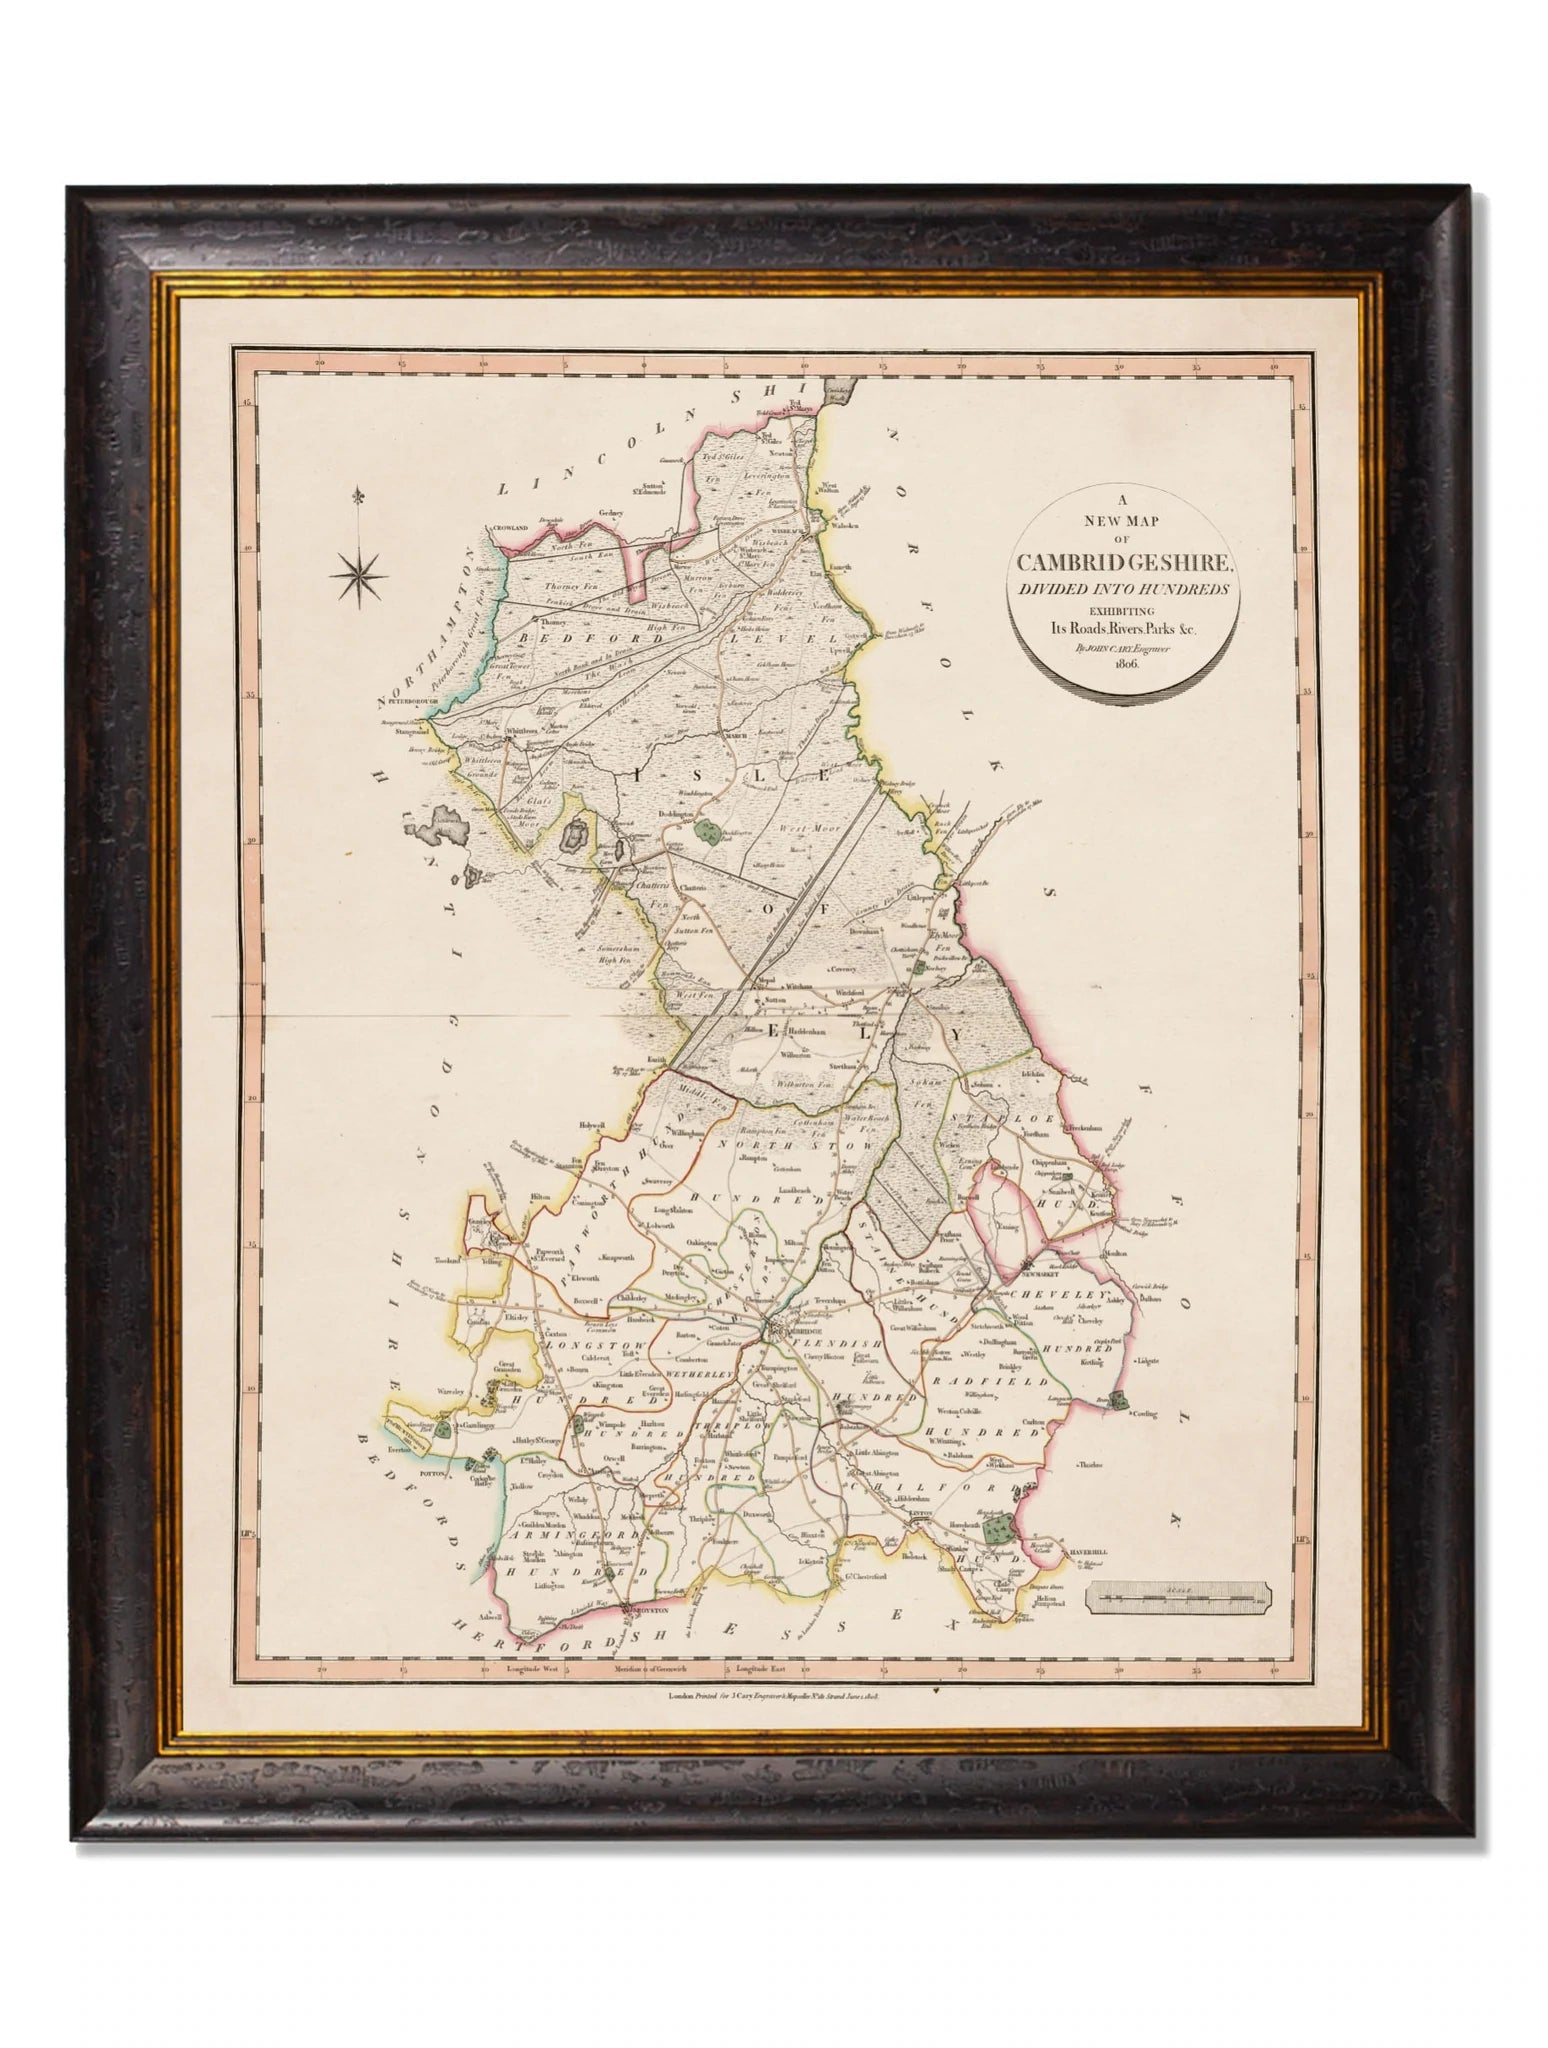 C.1806 County Maps Of England Frames for sale - Woodcock and Cavendish